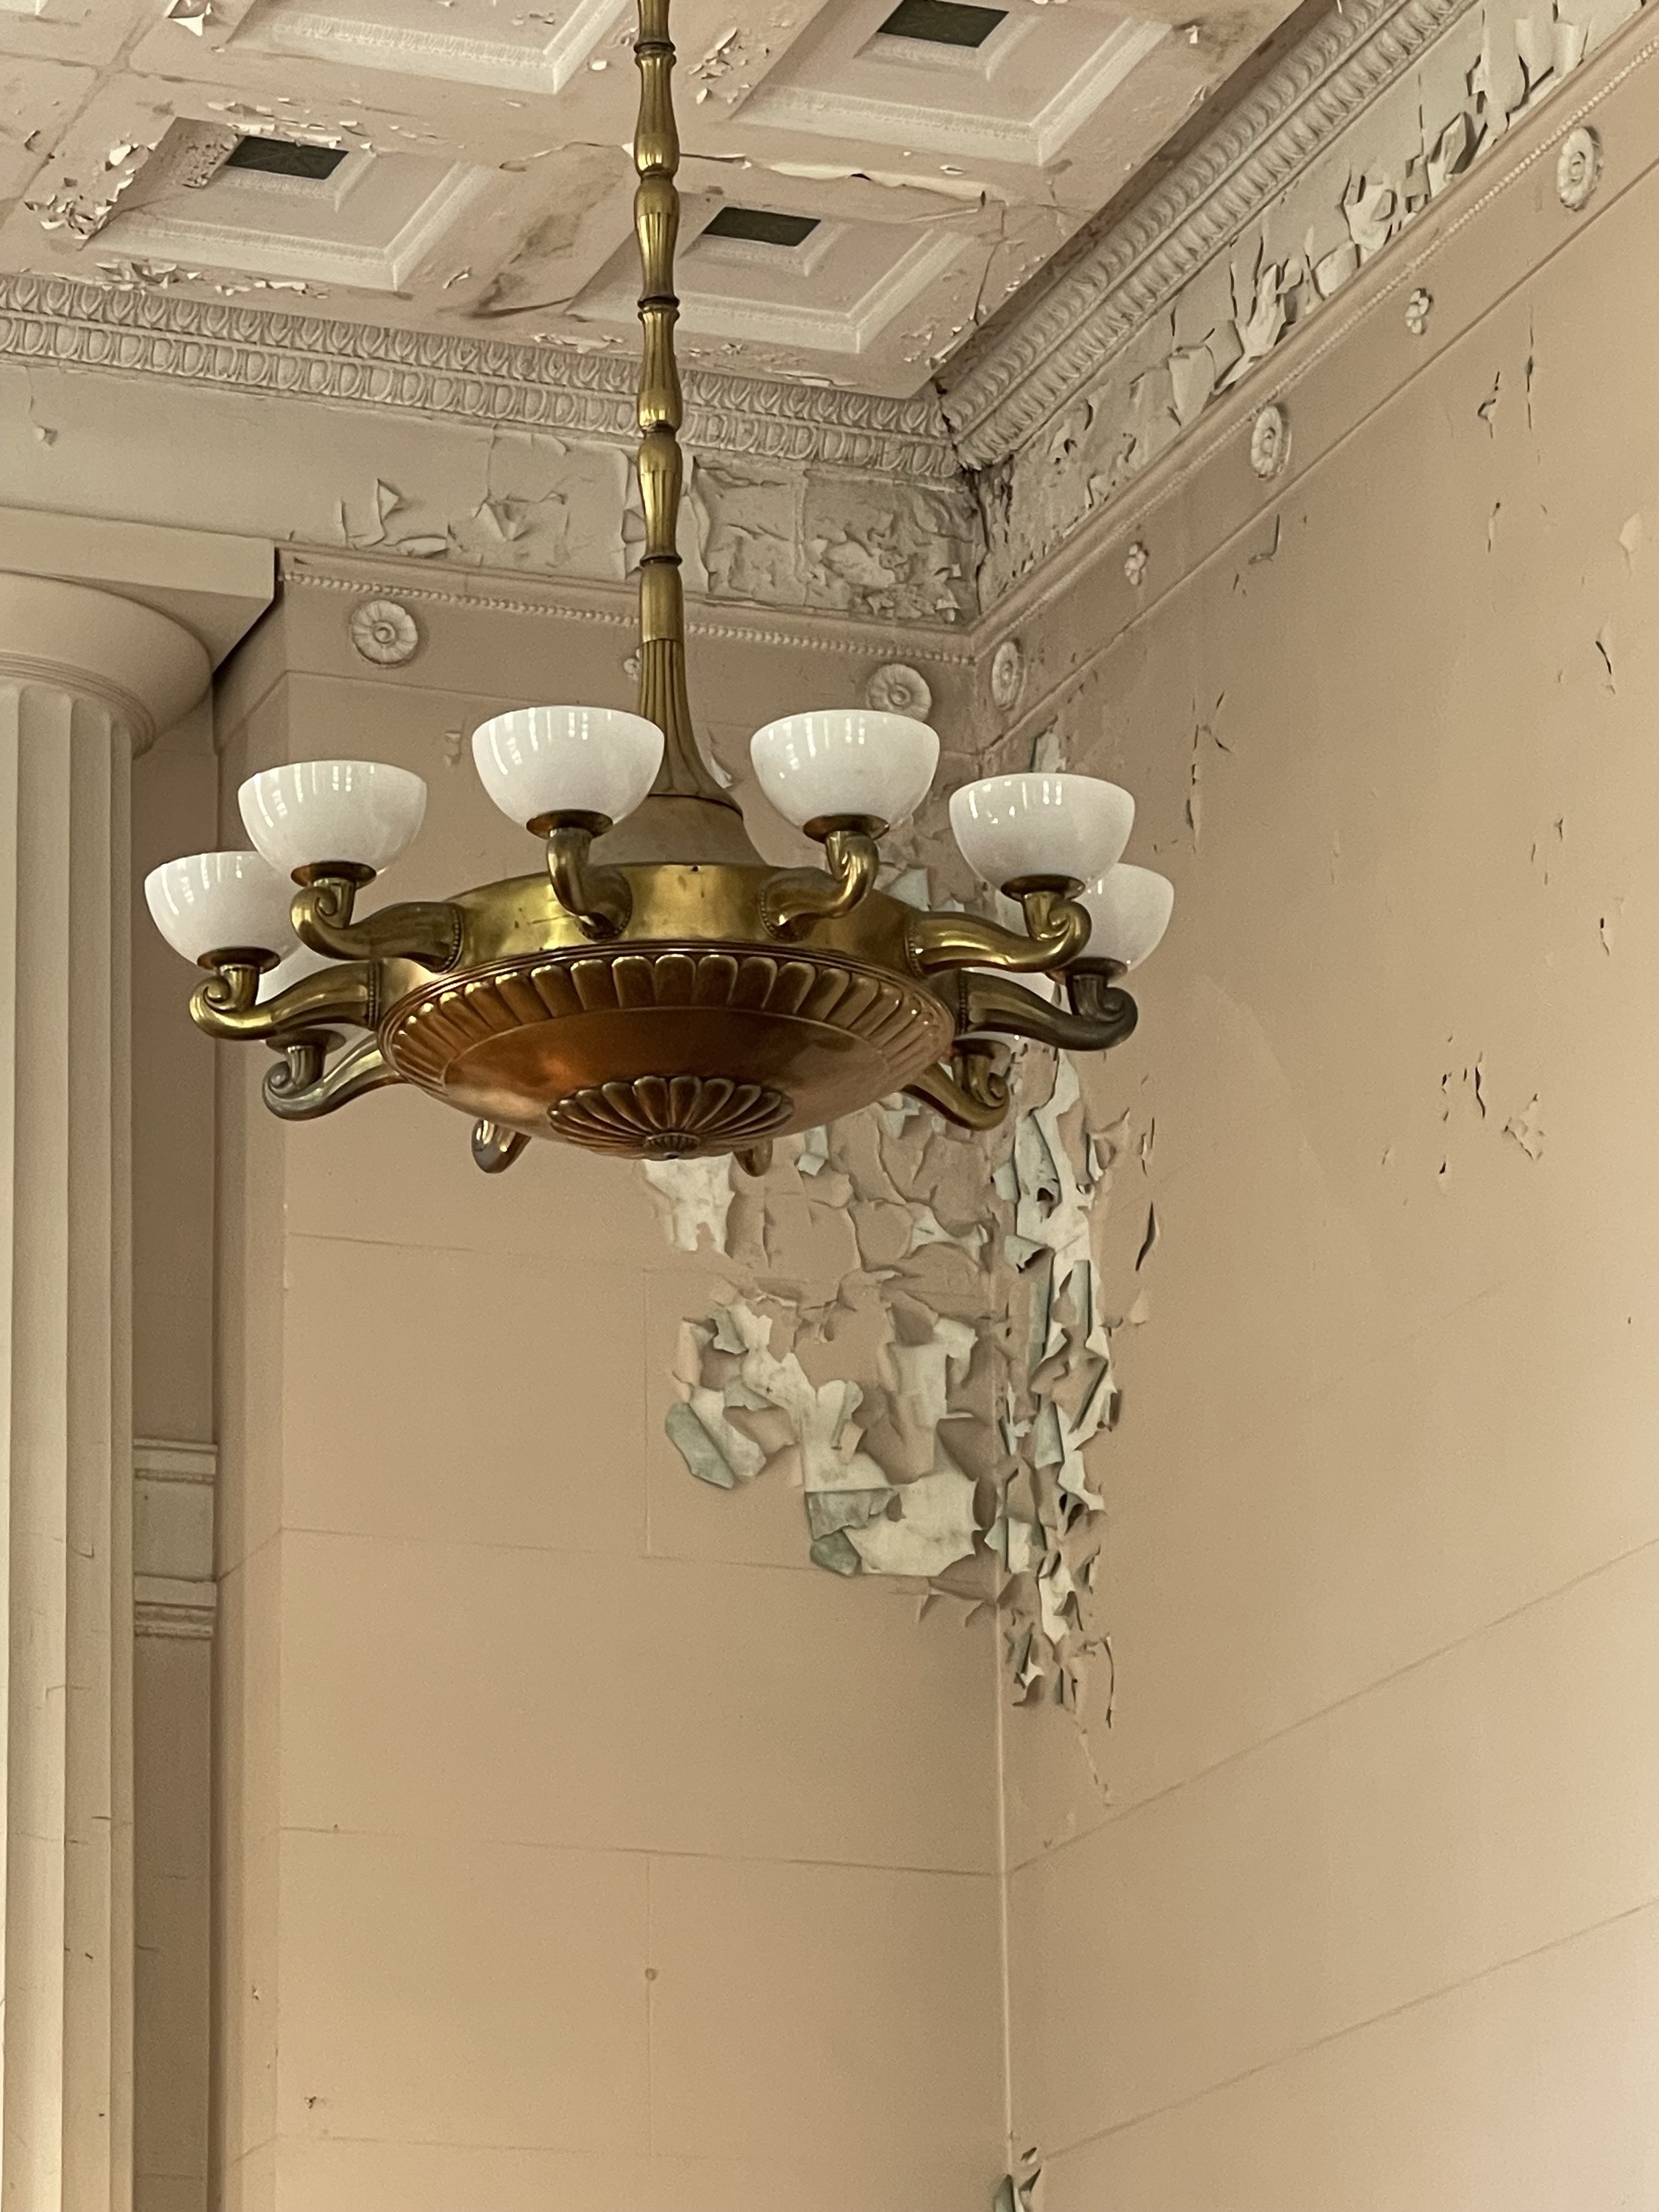 Large, ornate chandelier hanging from a ceiling with peeling paint on the walls and ceiling.